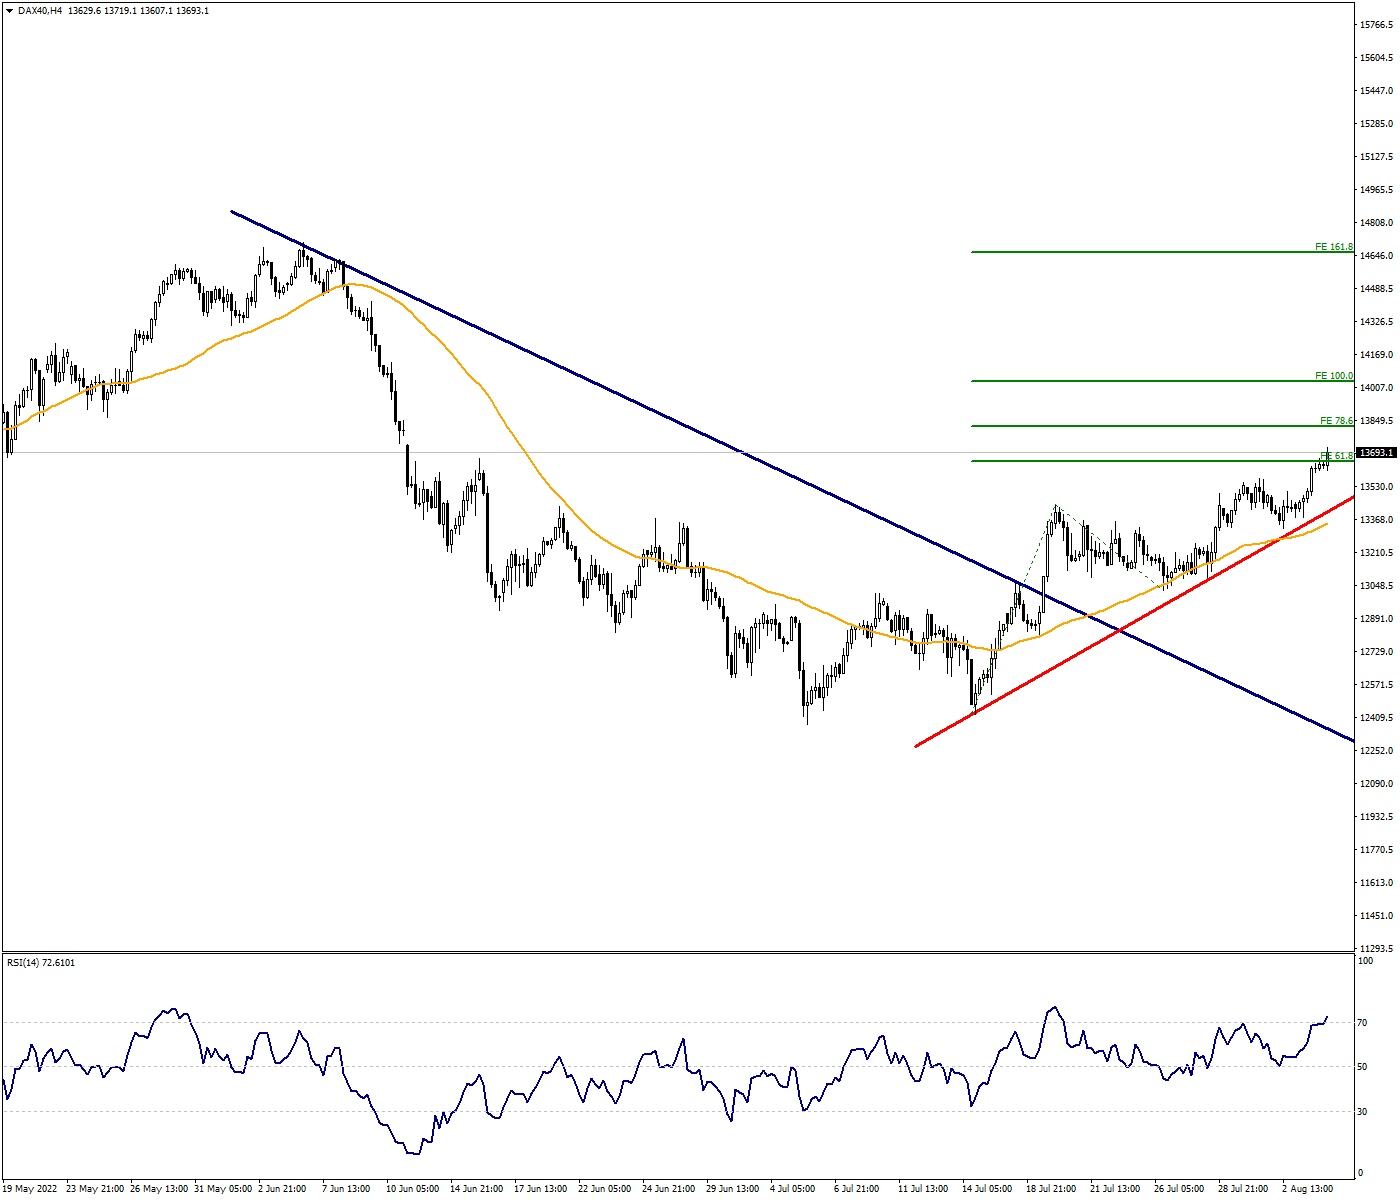 DAX40:Index Maintains Recovery Path